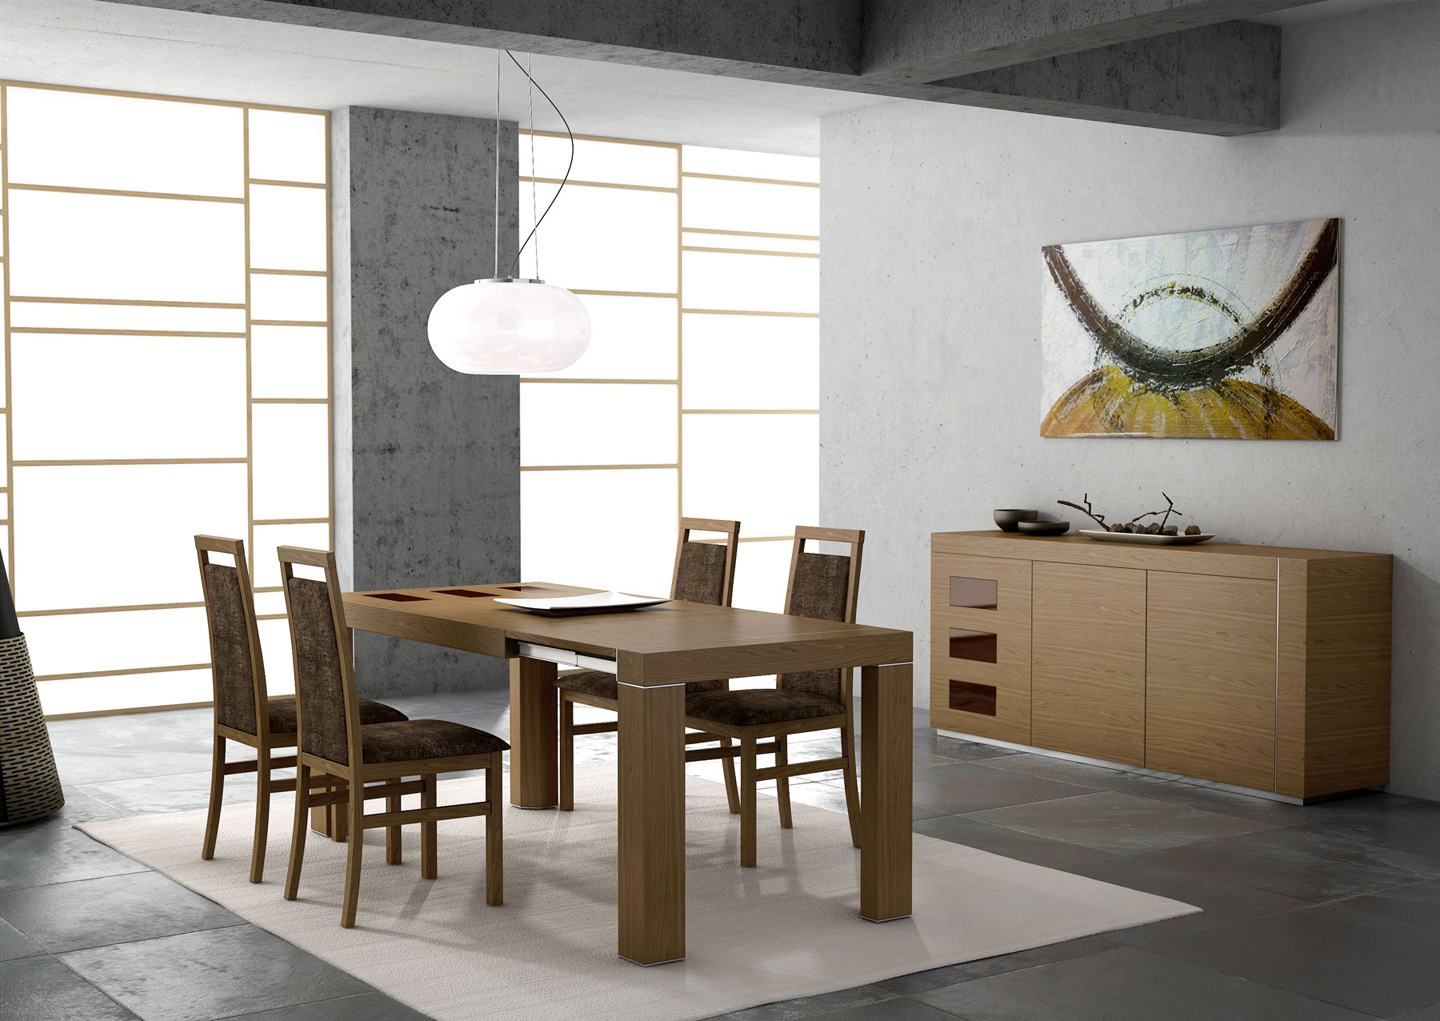 Wooden Dining Set Mesmerizing Wooden Dining Room Interior Set With Modern Chairs Set On Cream Rug Plus Oval Pendant Lamp Dining Room 10 Modern Dining Room Chairs That Inspire Your Design Creativity